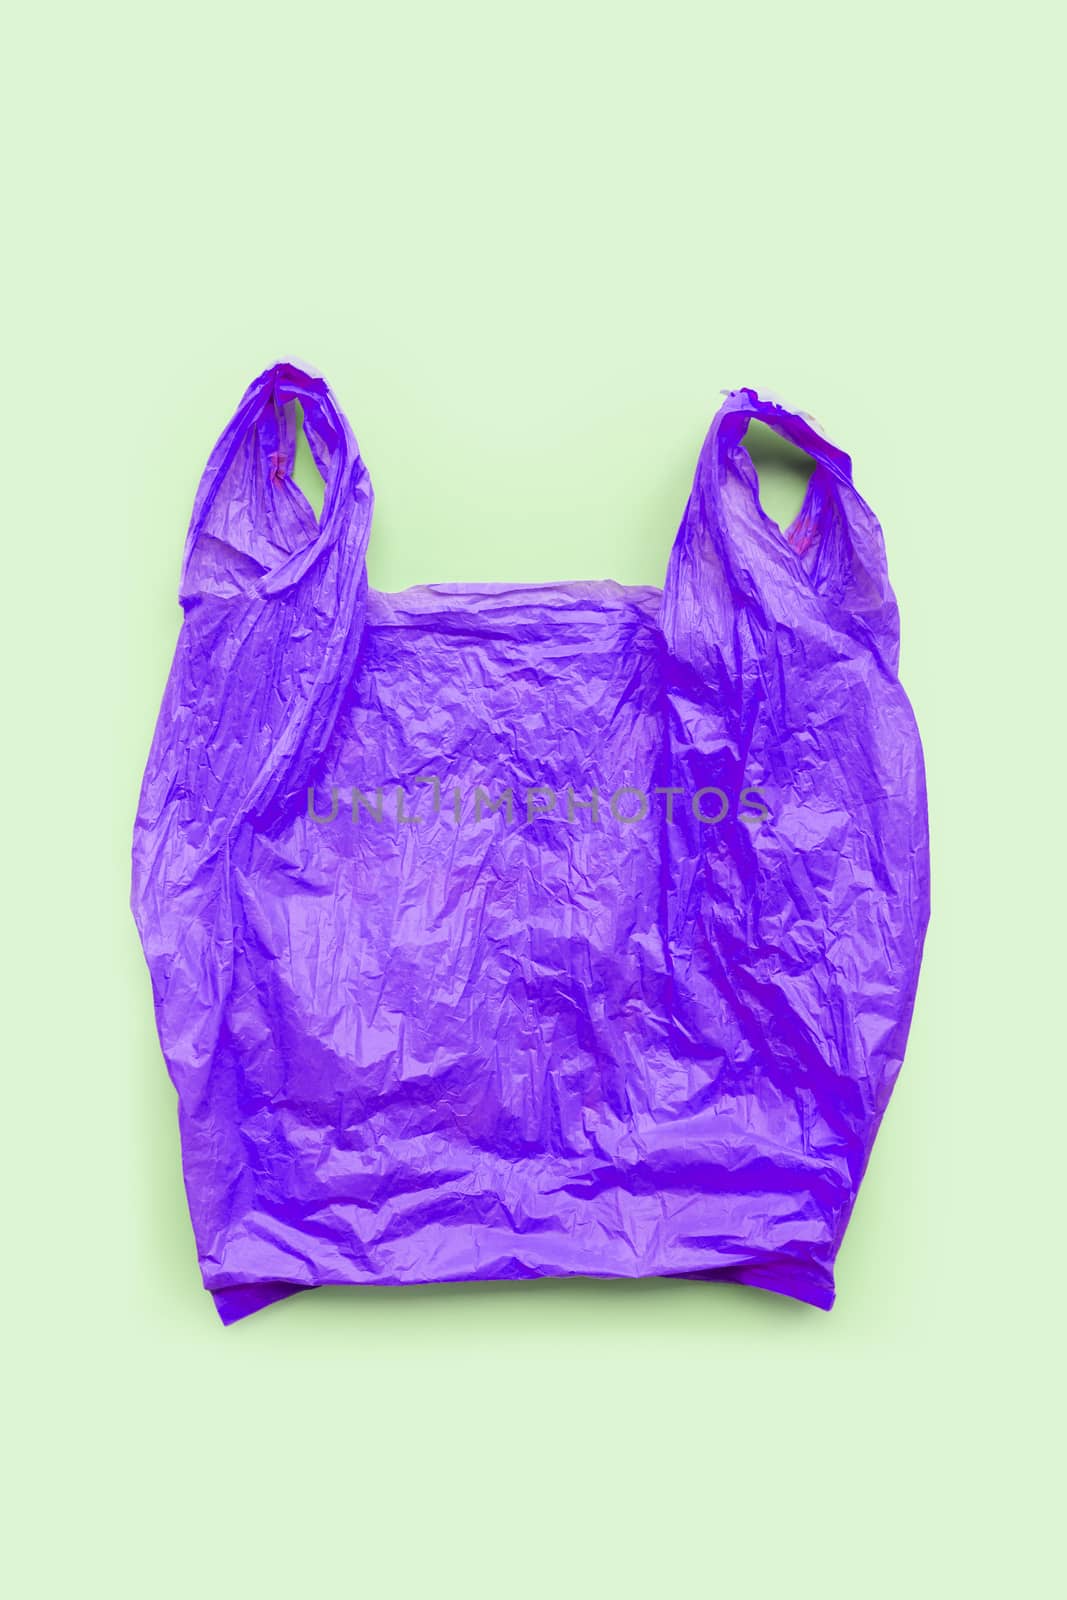 Purple plastic bag on green background. Environment pollution concept. Top view